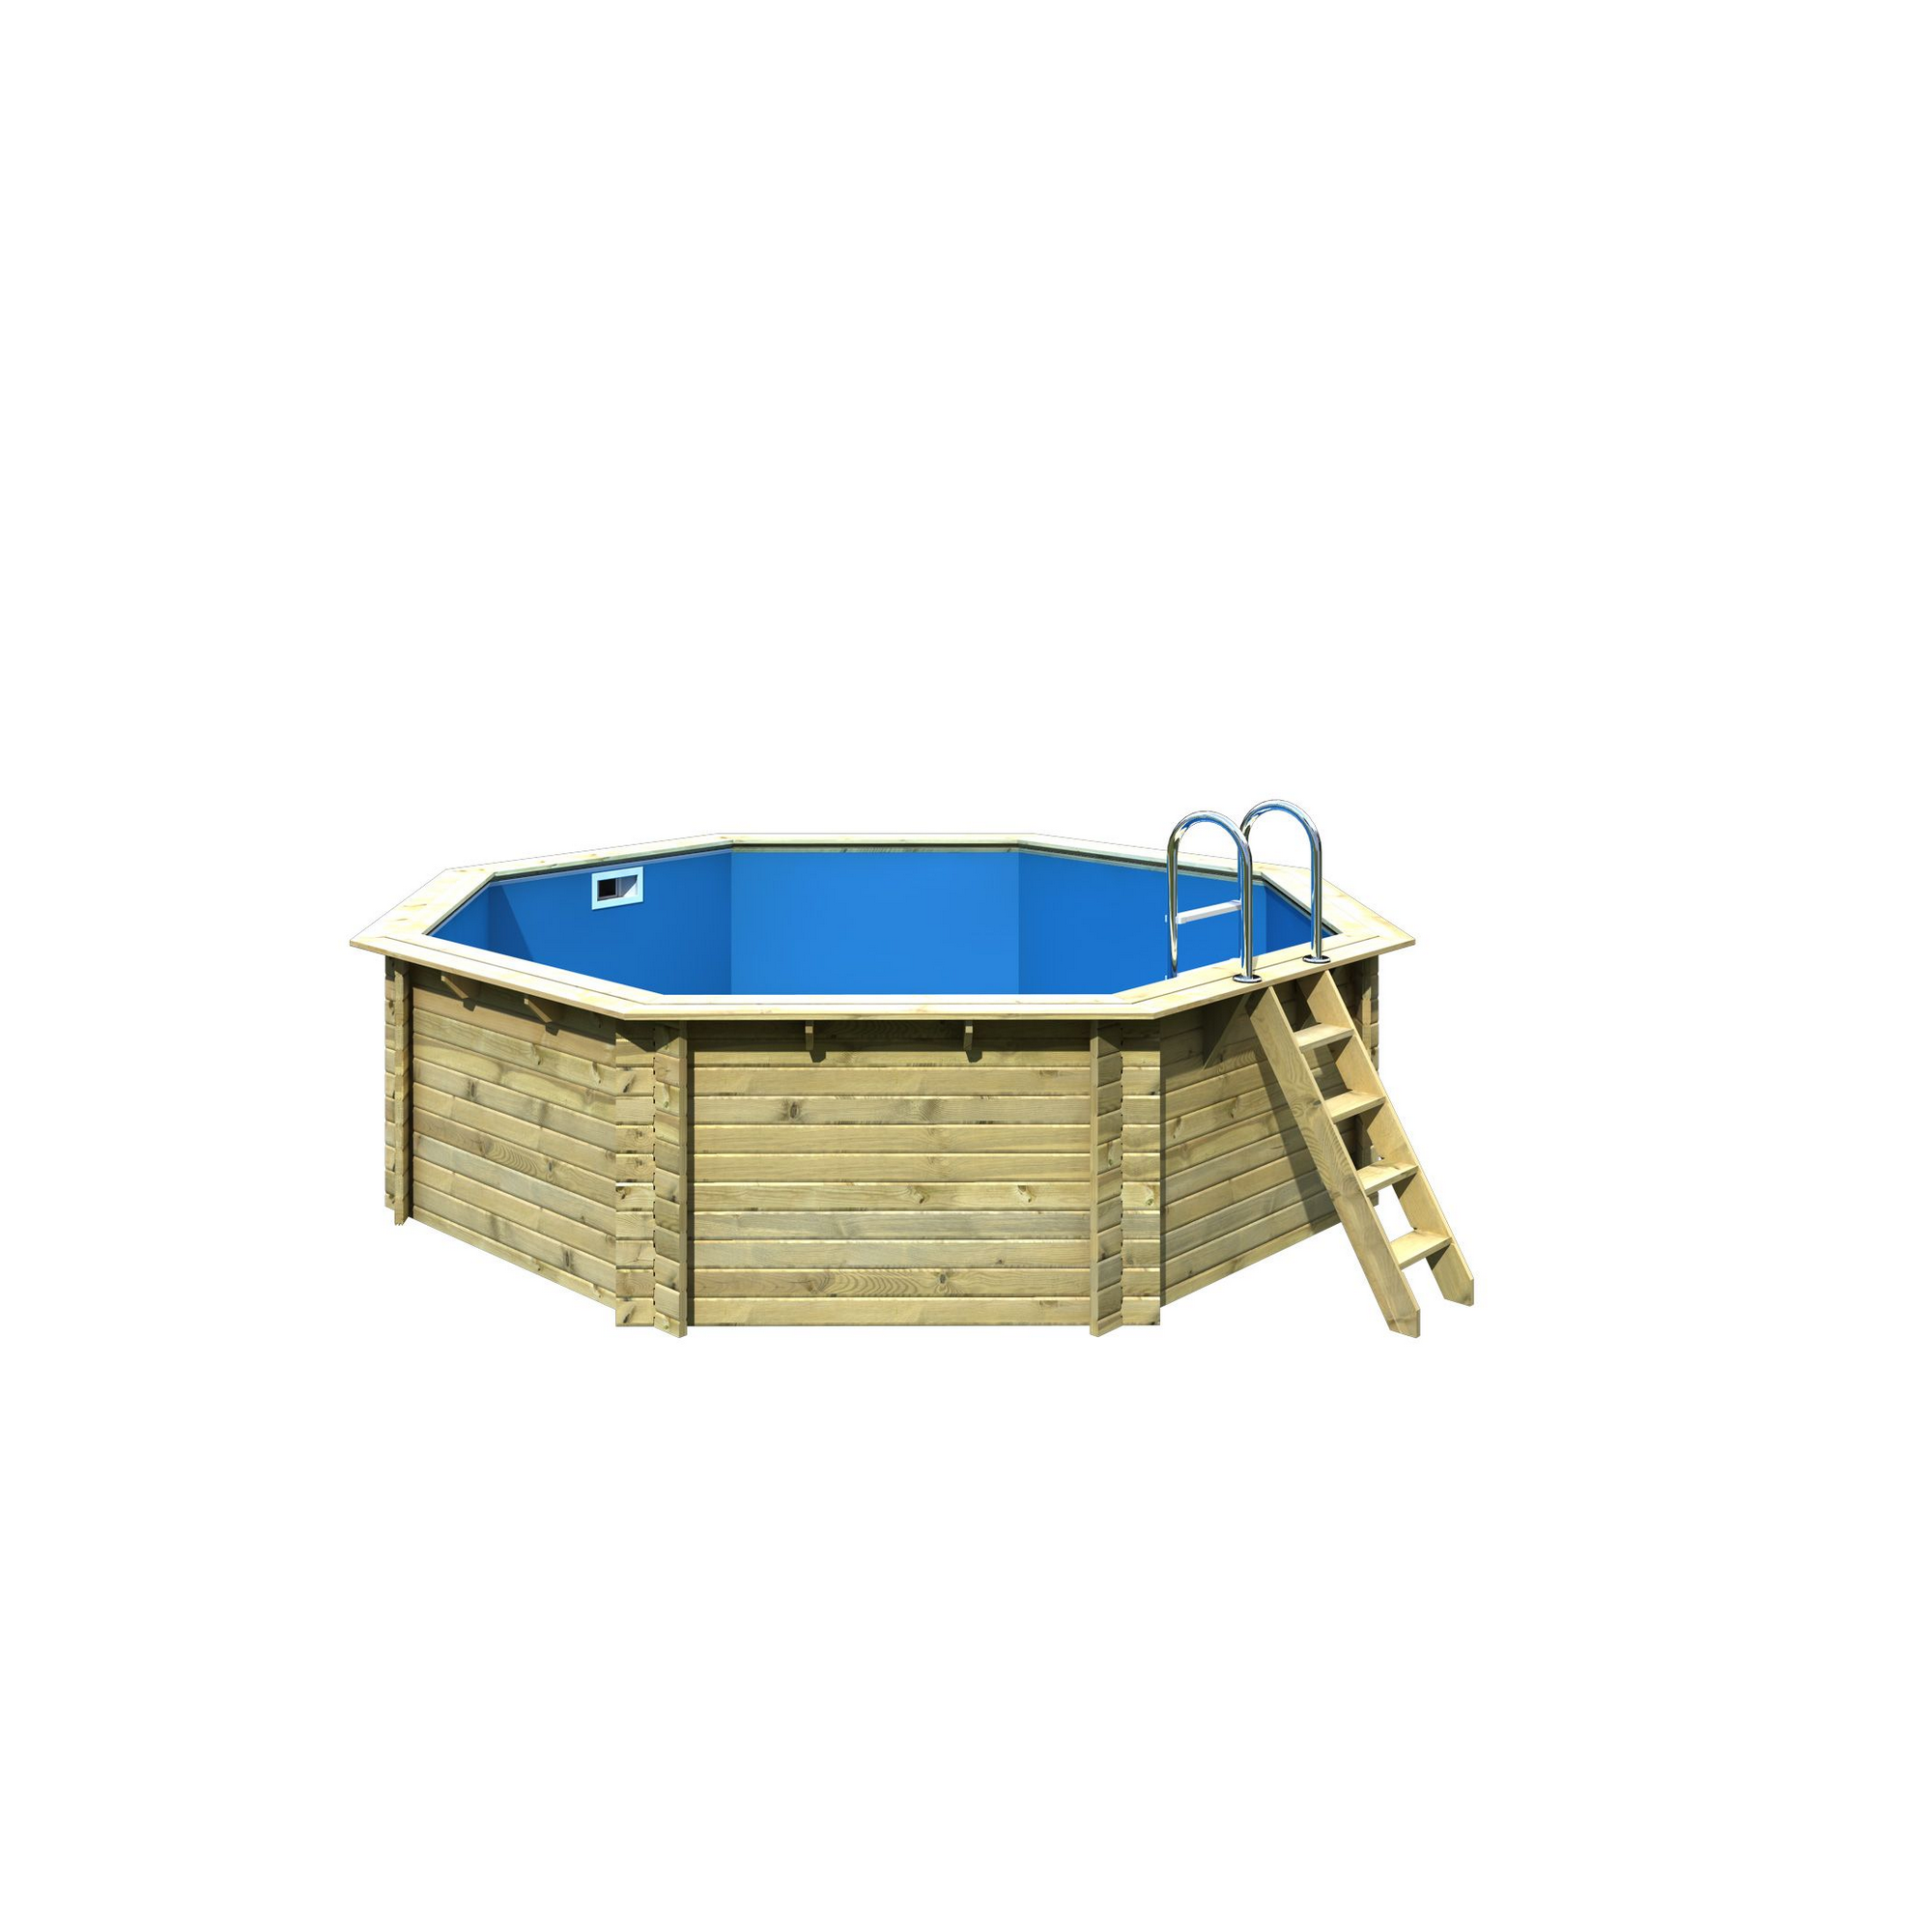 Massivholzpool 'Modell 2 A' natur 470 x 470 x 124 cm + product picture